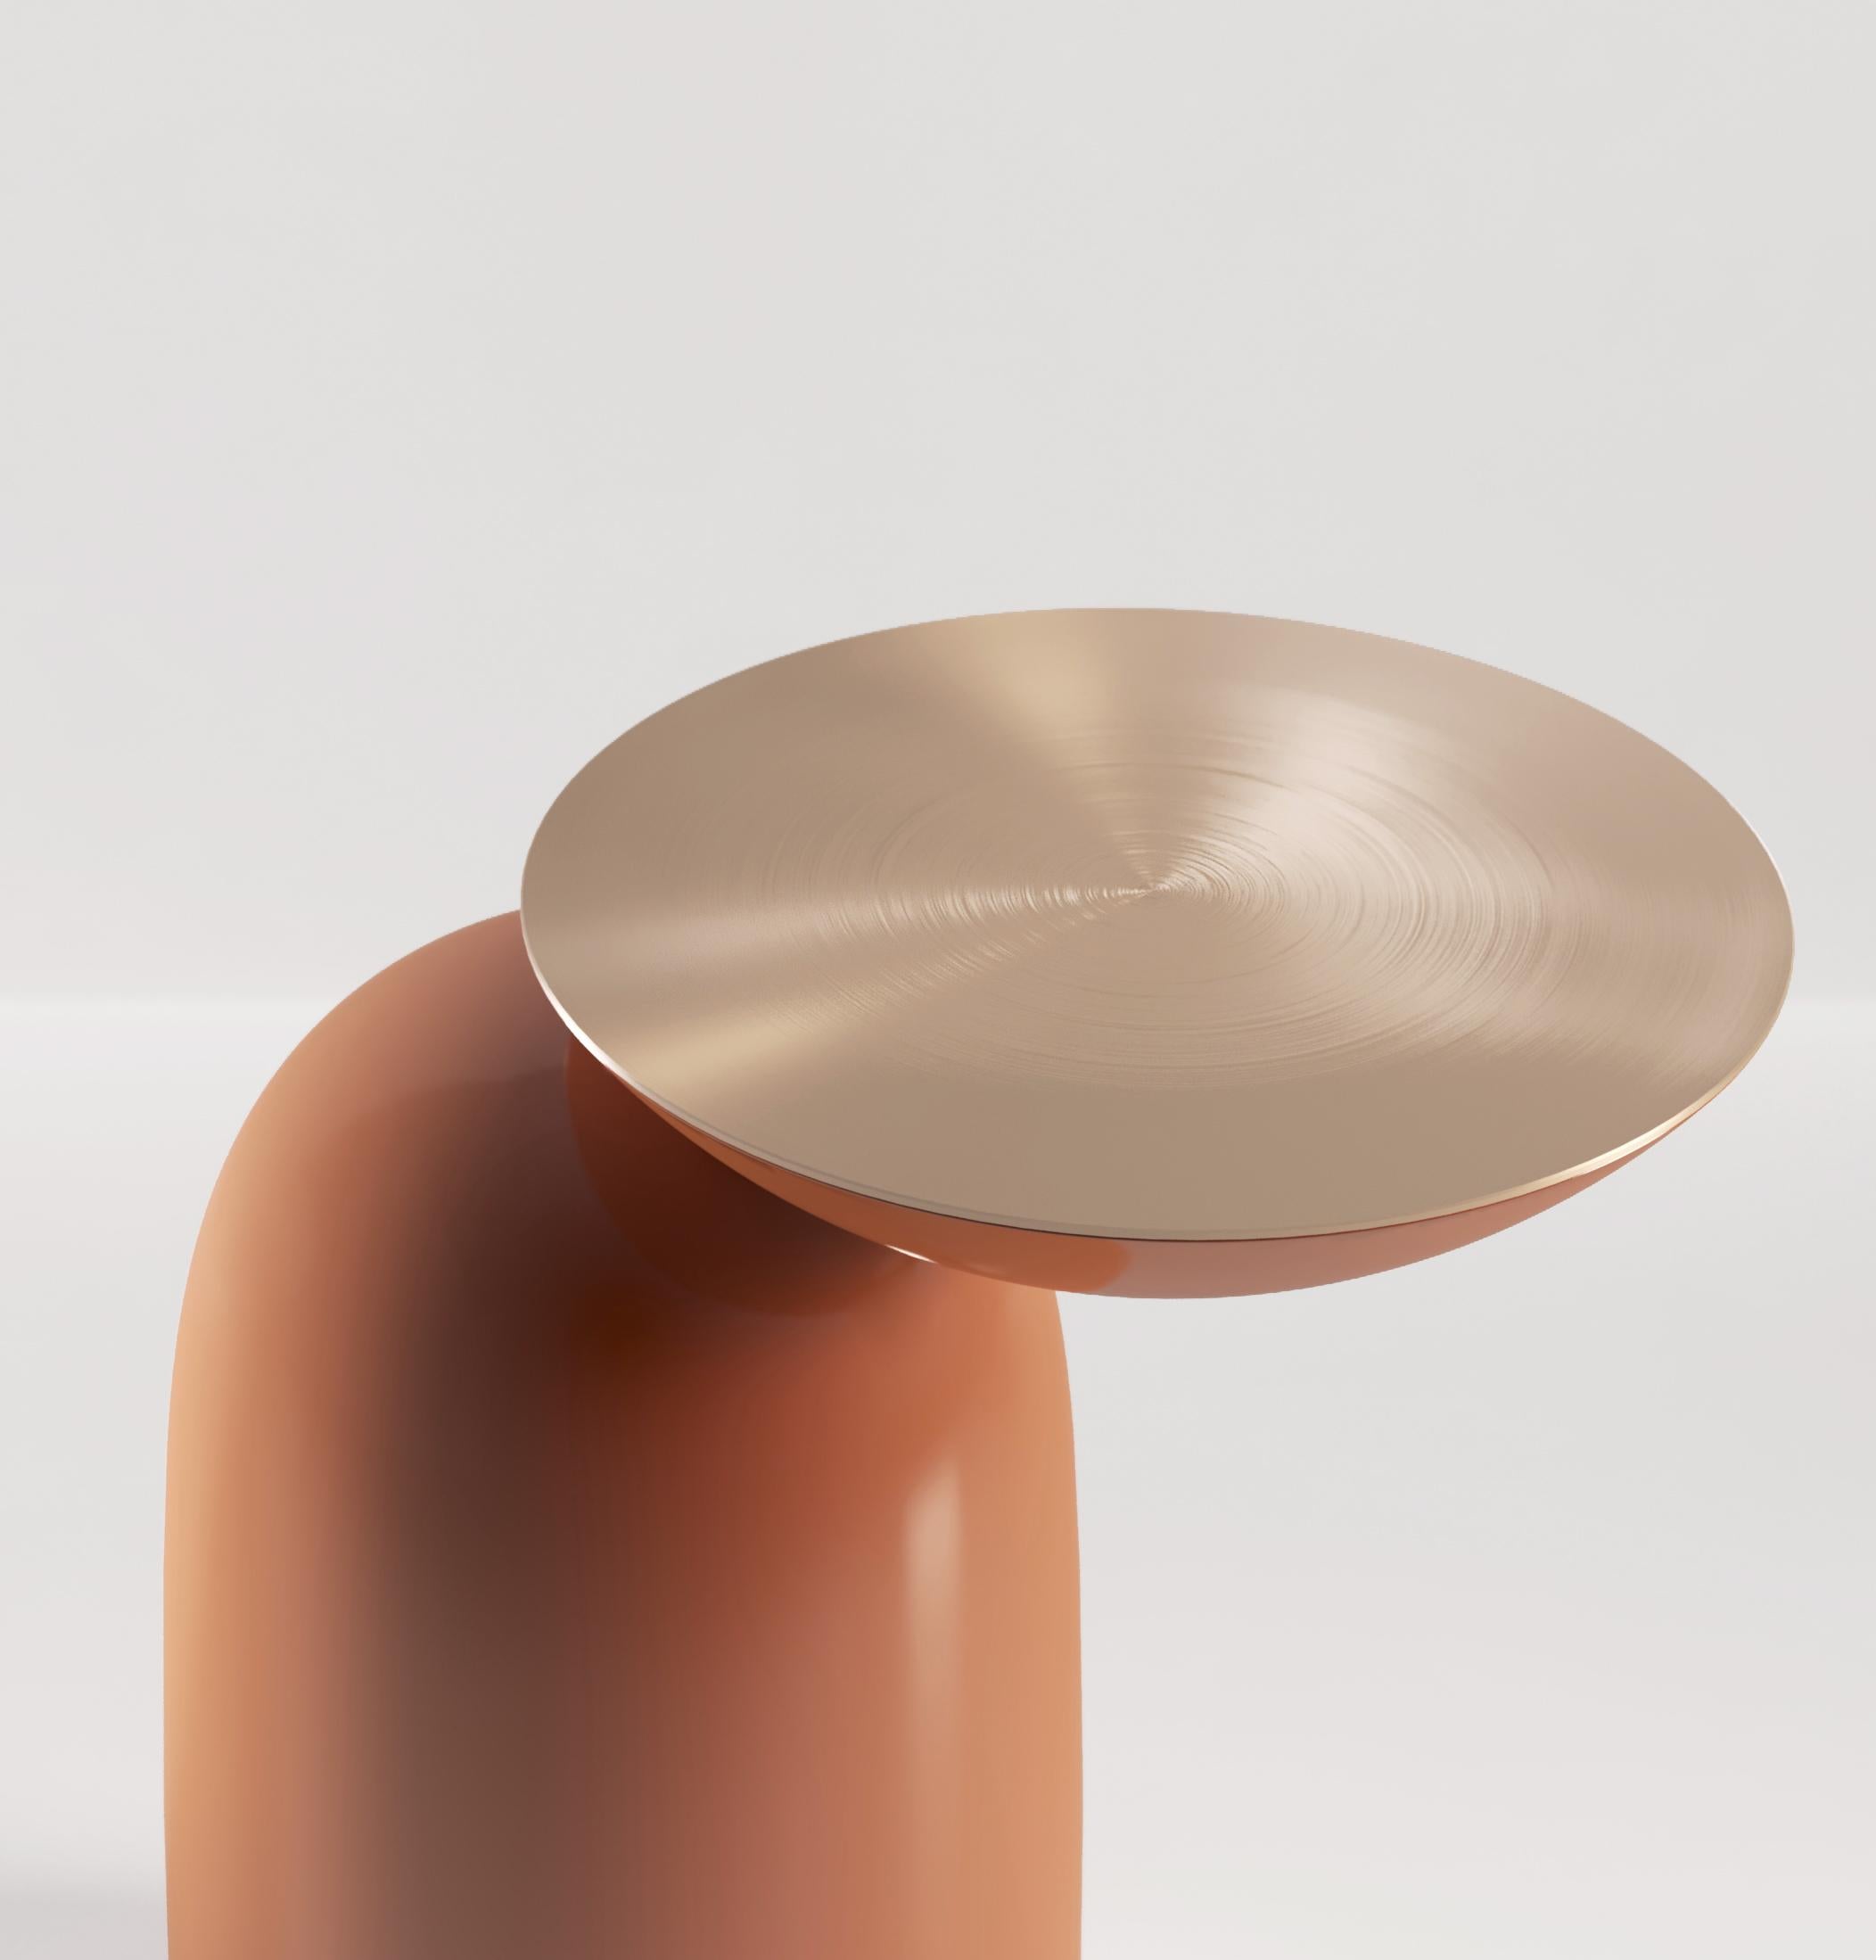 Pingu is a playful addition to any room, offering up a place for a drink or an ashtray beside your chair. An inverted dome is supported by a soft-shaped base which it is barely touching. A metal top adds a touch of luxury. Pingu is available in any